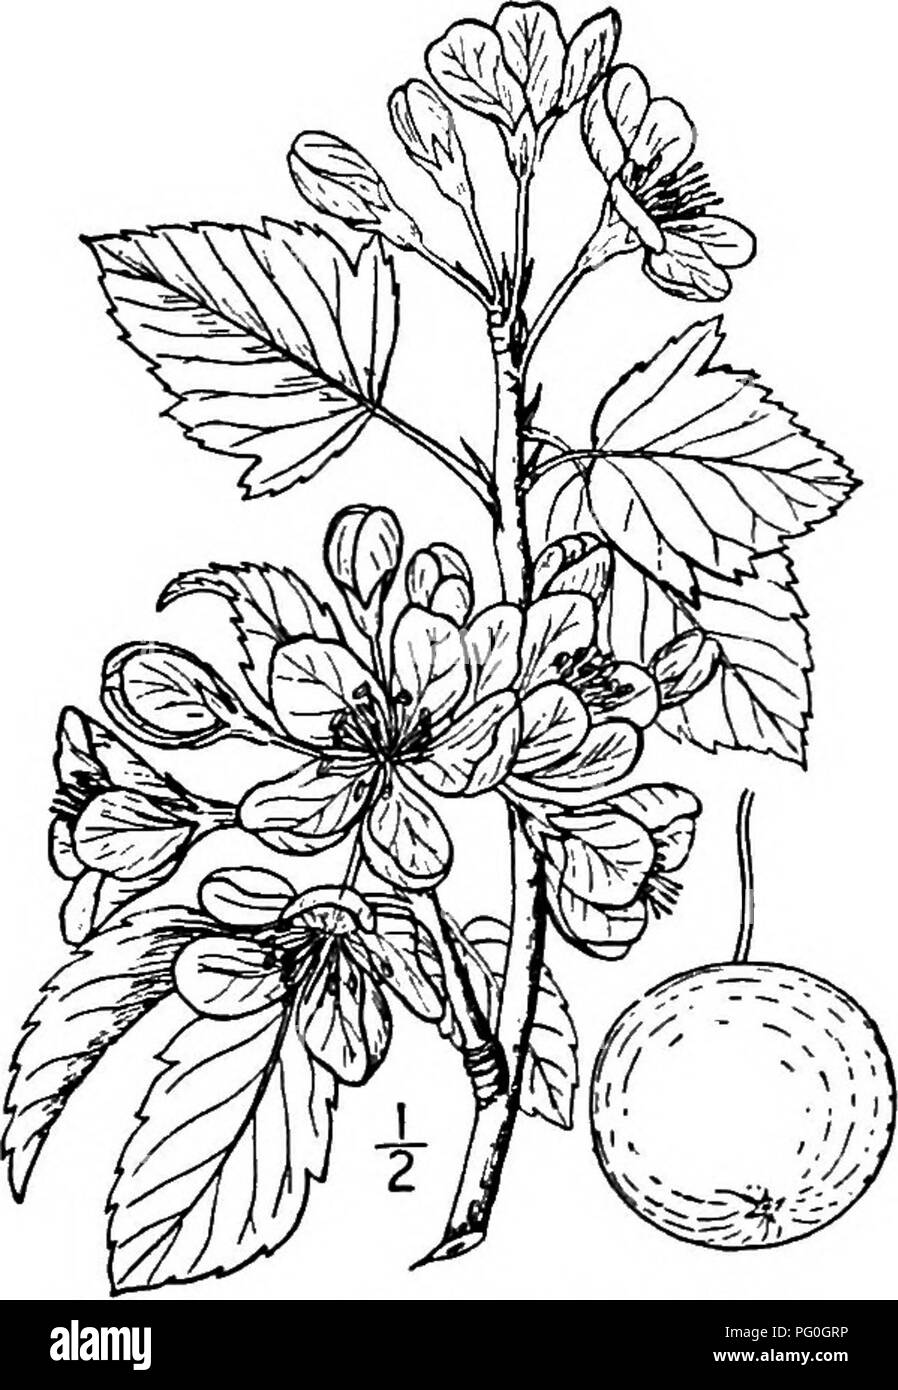 . North American trees : being descriptions and illustrations of the trees growing independently of cultivation in North America, north of Mexico and the West Indies . Trees. Fig. 377. — Narrow-leaved Crab Apple. The wood is hard, close-grained, hght red- dish brown; its speciiic gravity about 0.68. It is sometimes used in the manufacture of tools, handles, and portions of machinery. The tree is also called Southern crab apple. The fruit is used for jellies and cider. This is one of the most charming of North American trees on account of its abimdance of showy, fragrant flowers. 2. AMERICAN CR Stock Photo